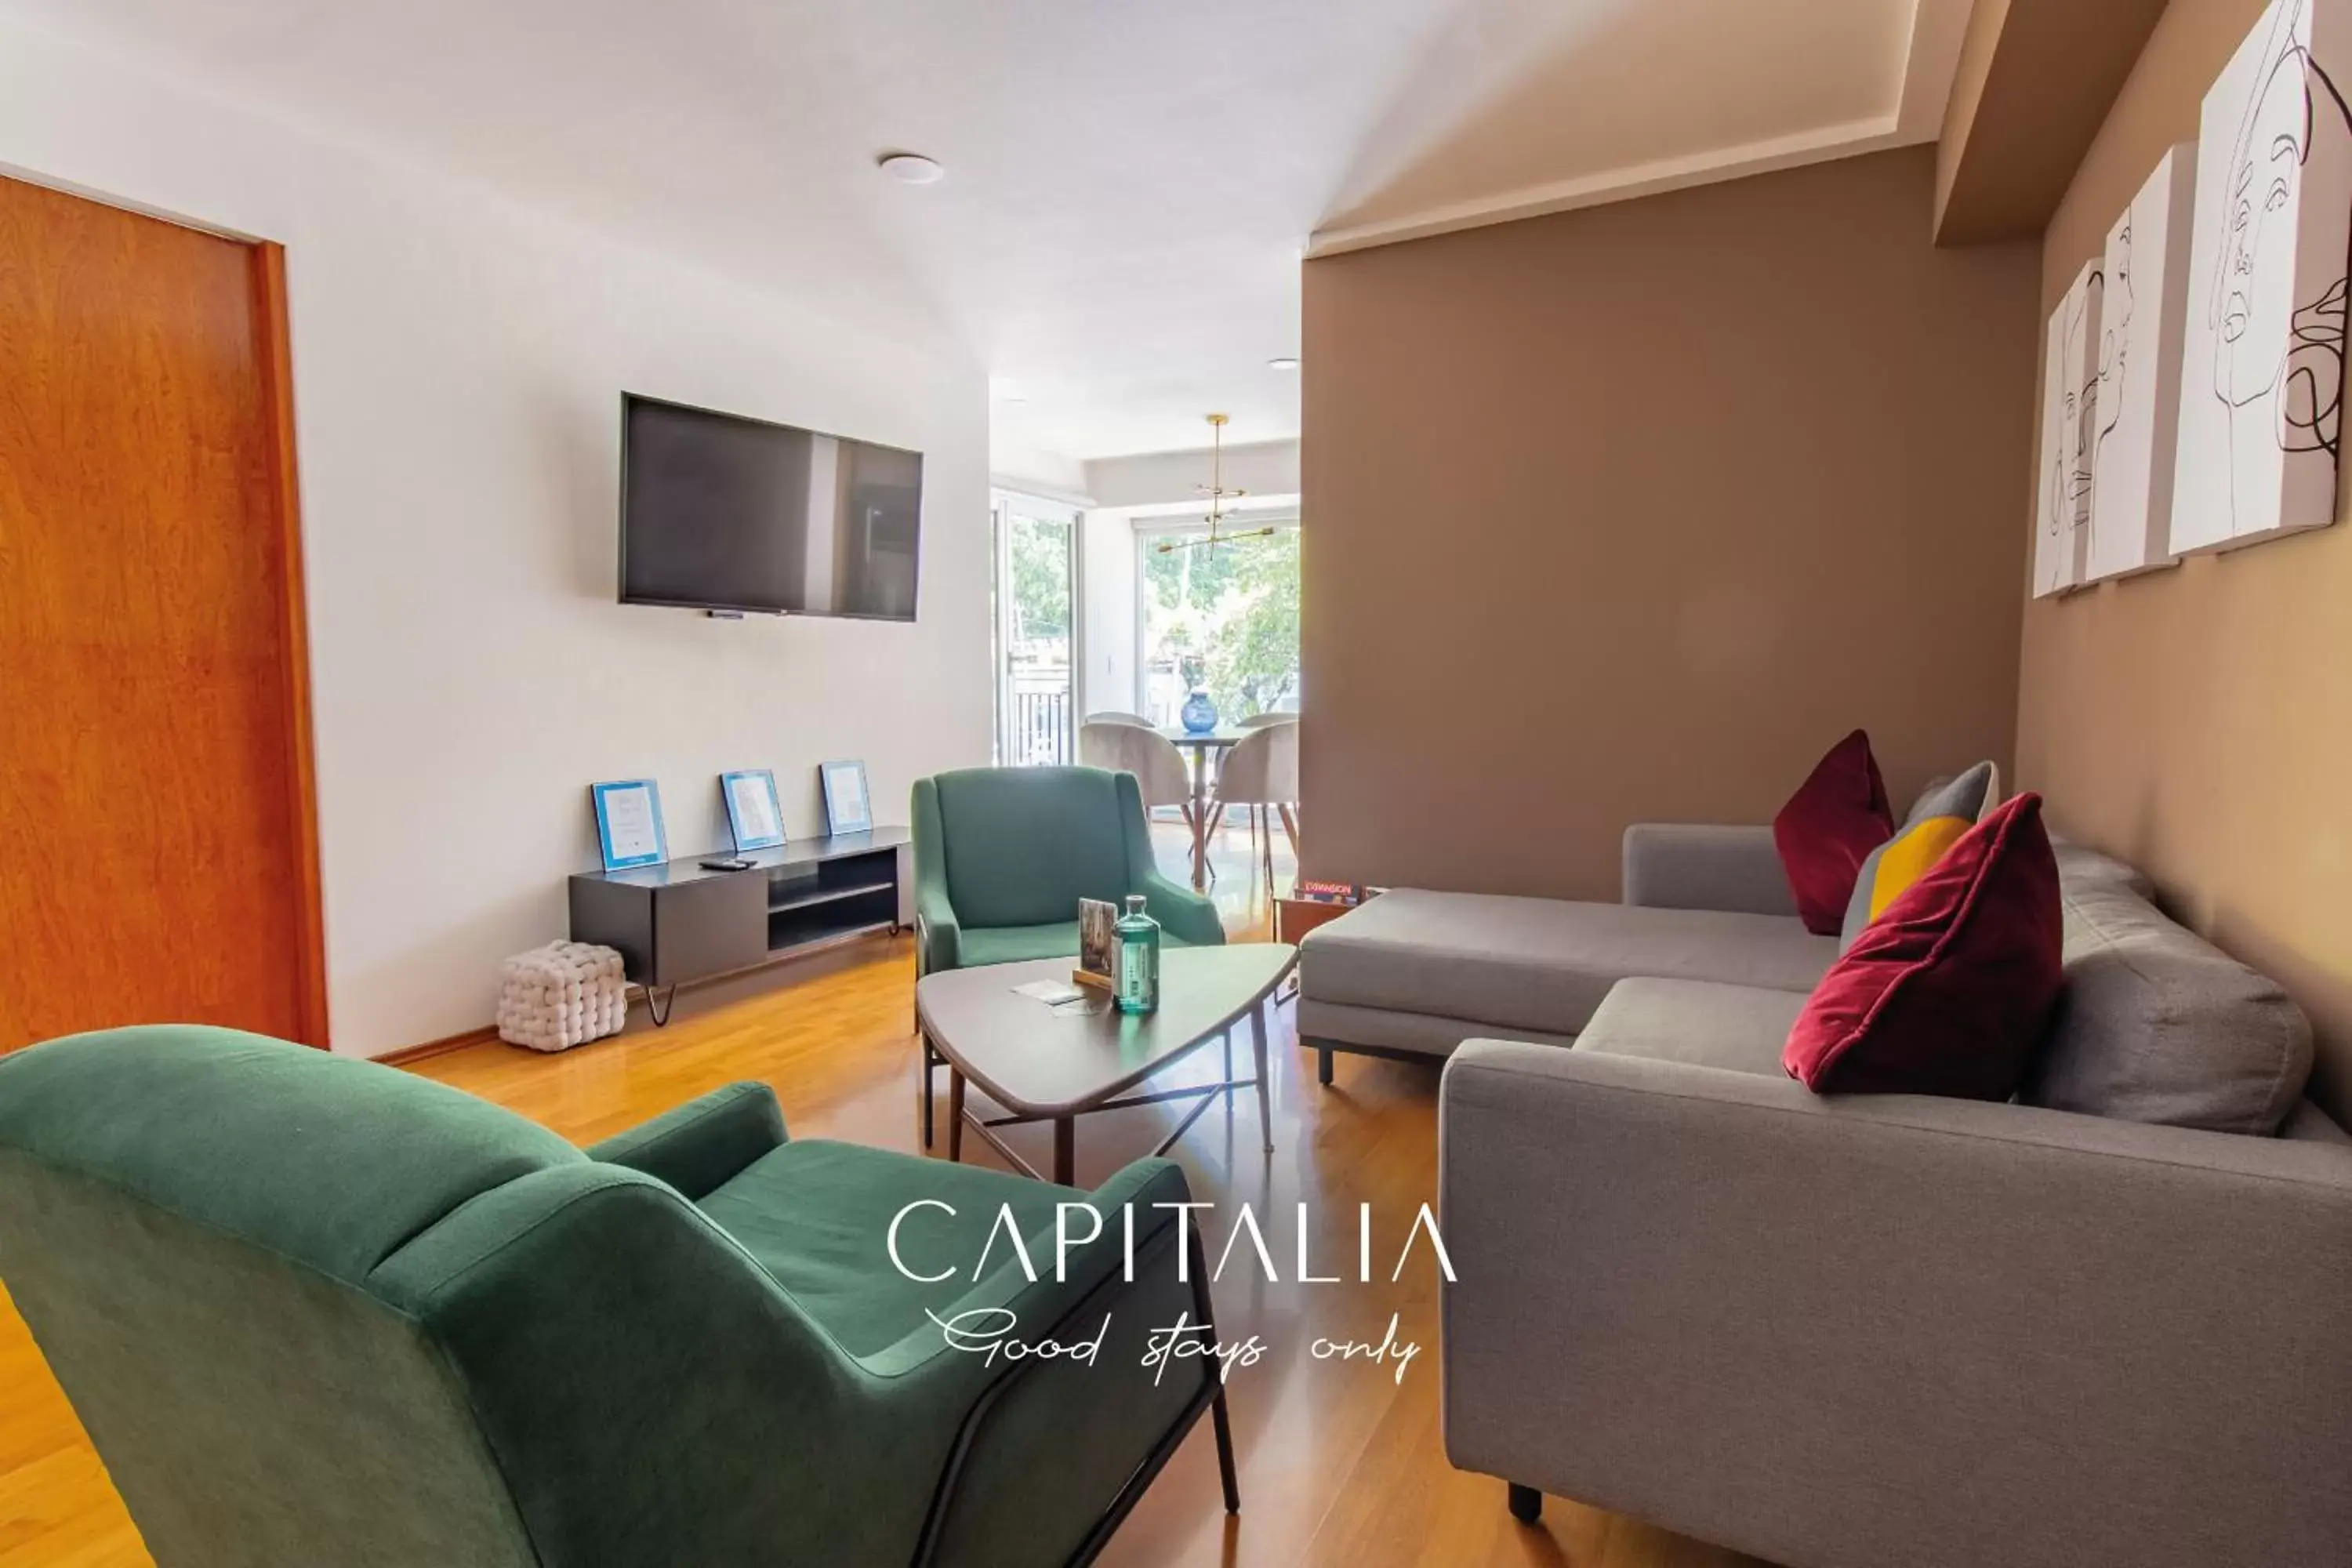 Apartment with Terrace in Capitalia - Apartments - Anzures